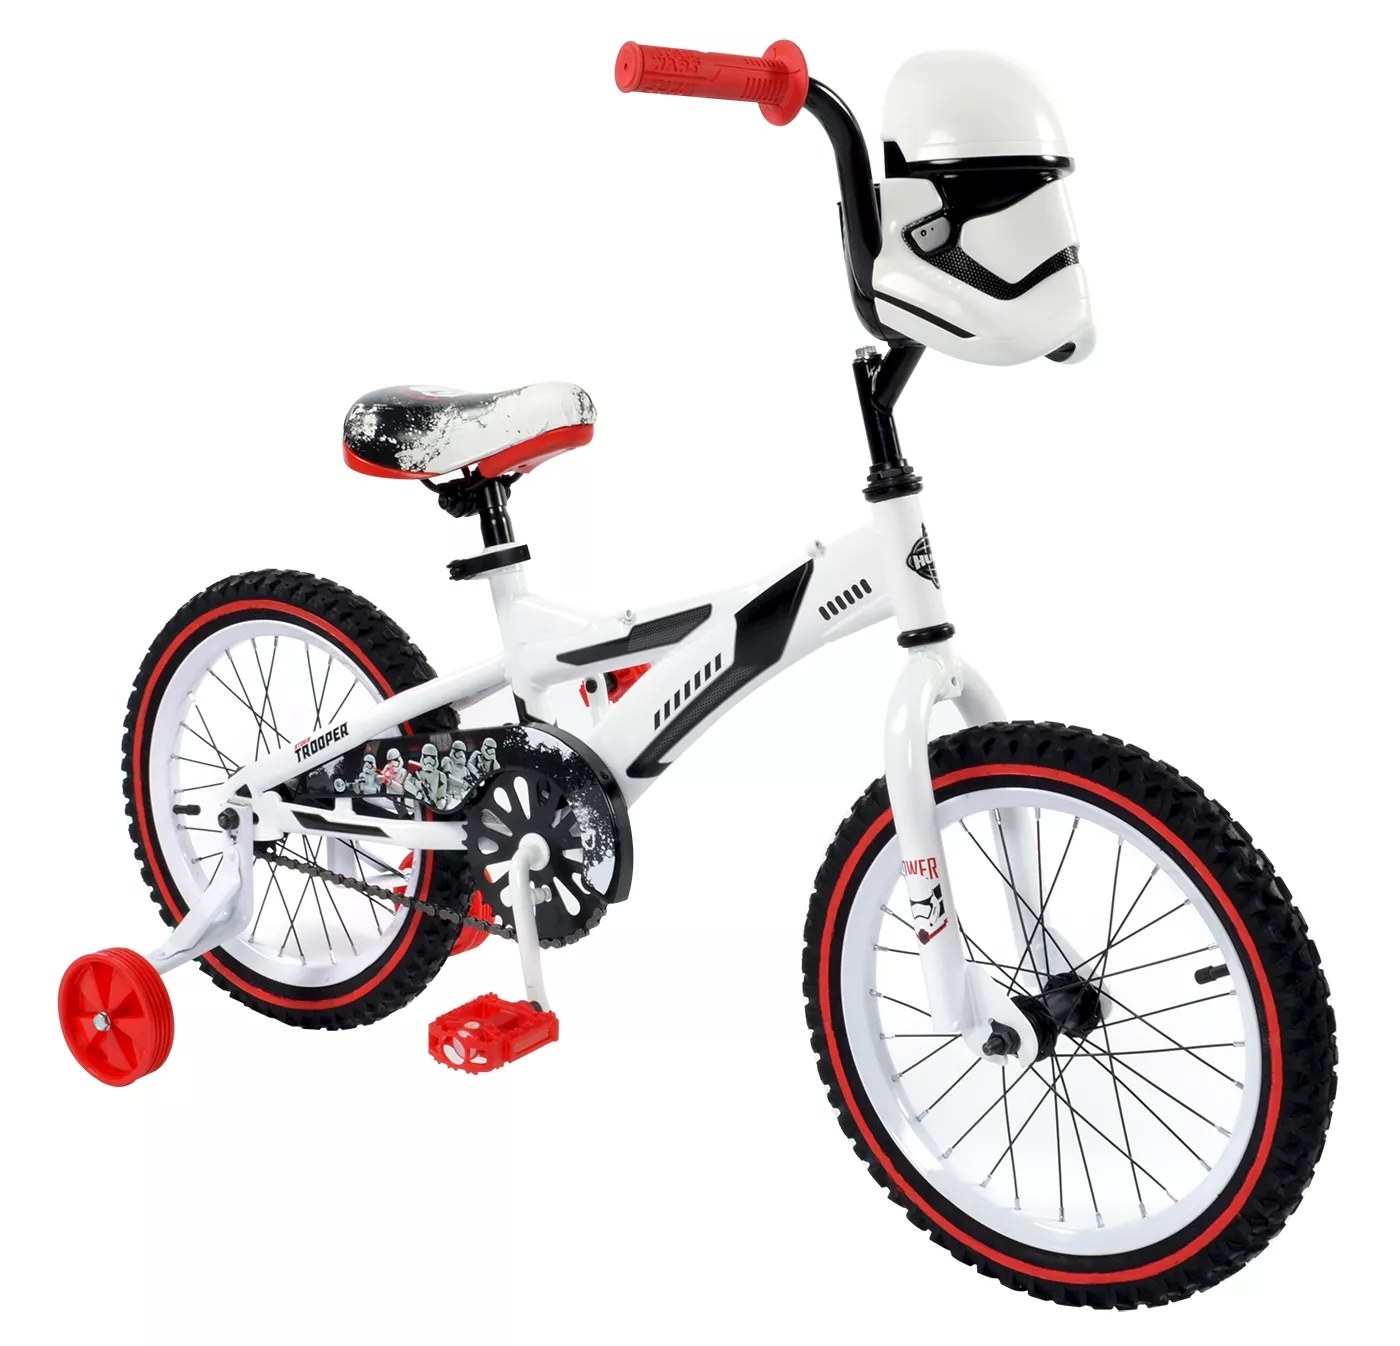 The Stormtrooper bike with training wheels